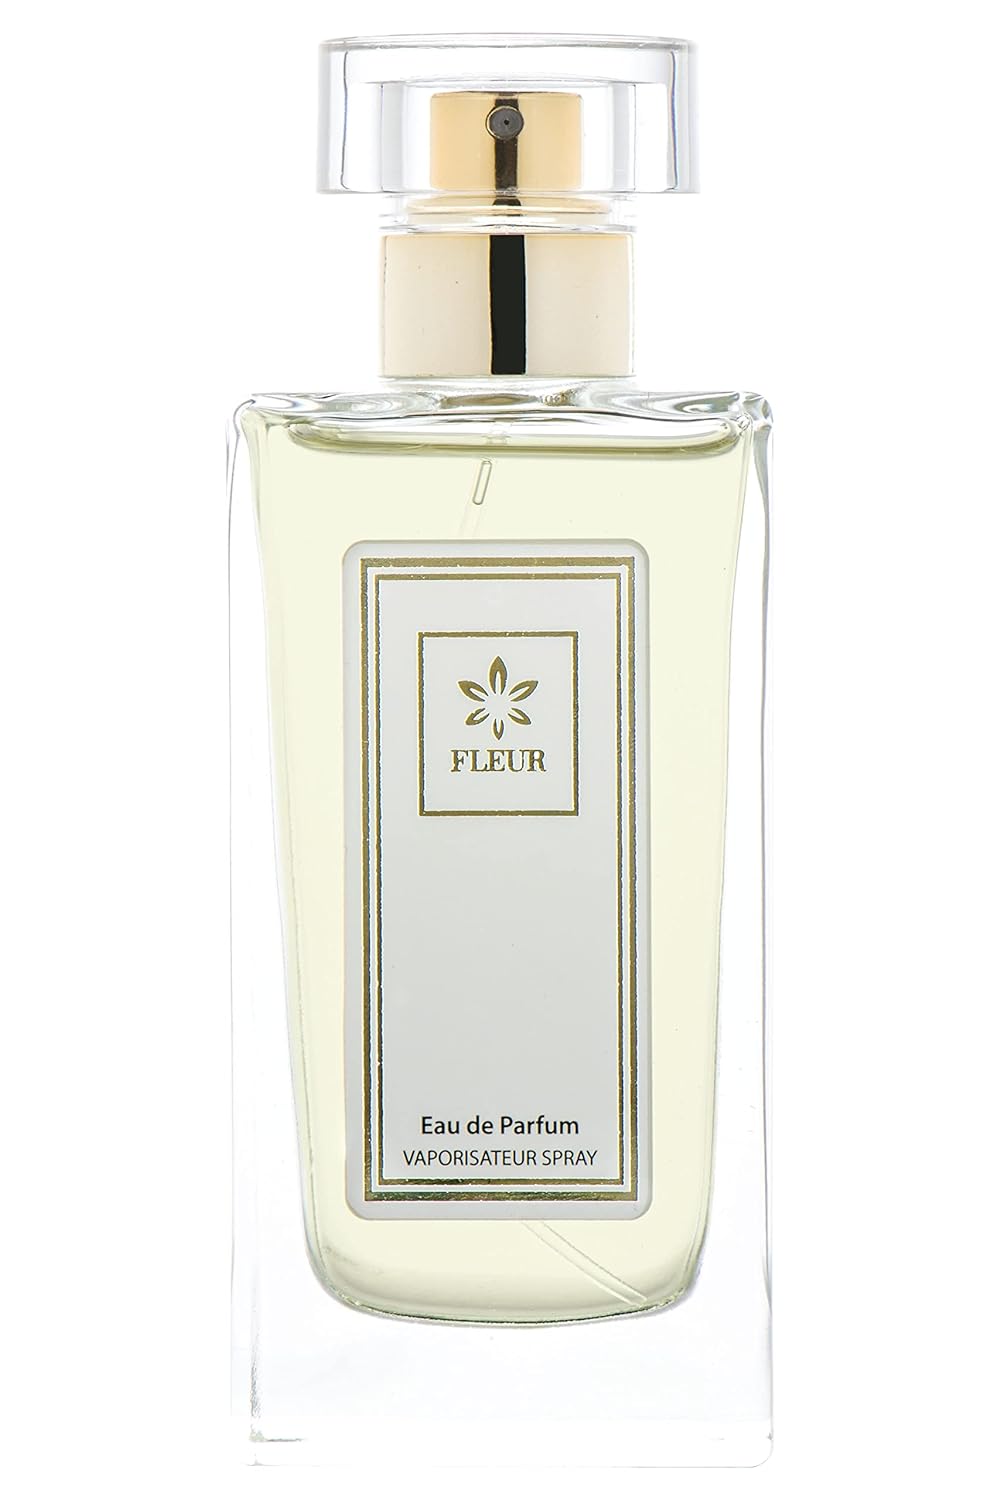 Fleur No. 266 Inspired by Black Opium Perfume Dupes for Women, fragrance twins, women \ 's fragrance spray 50 ml